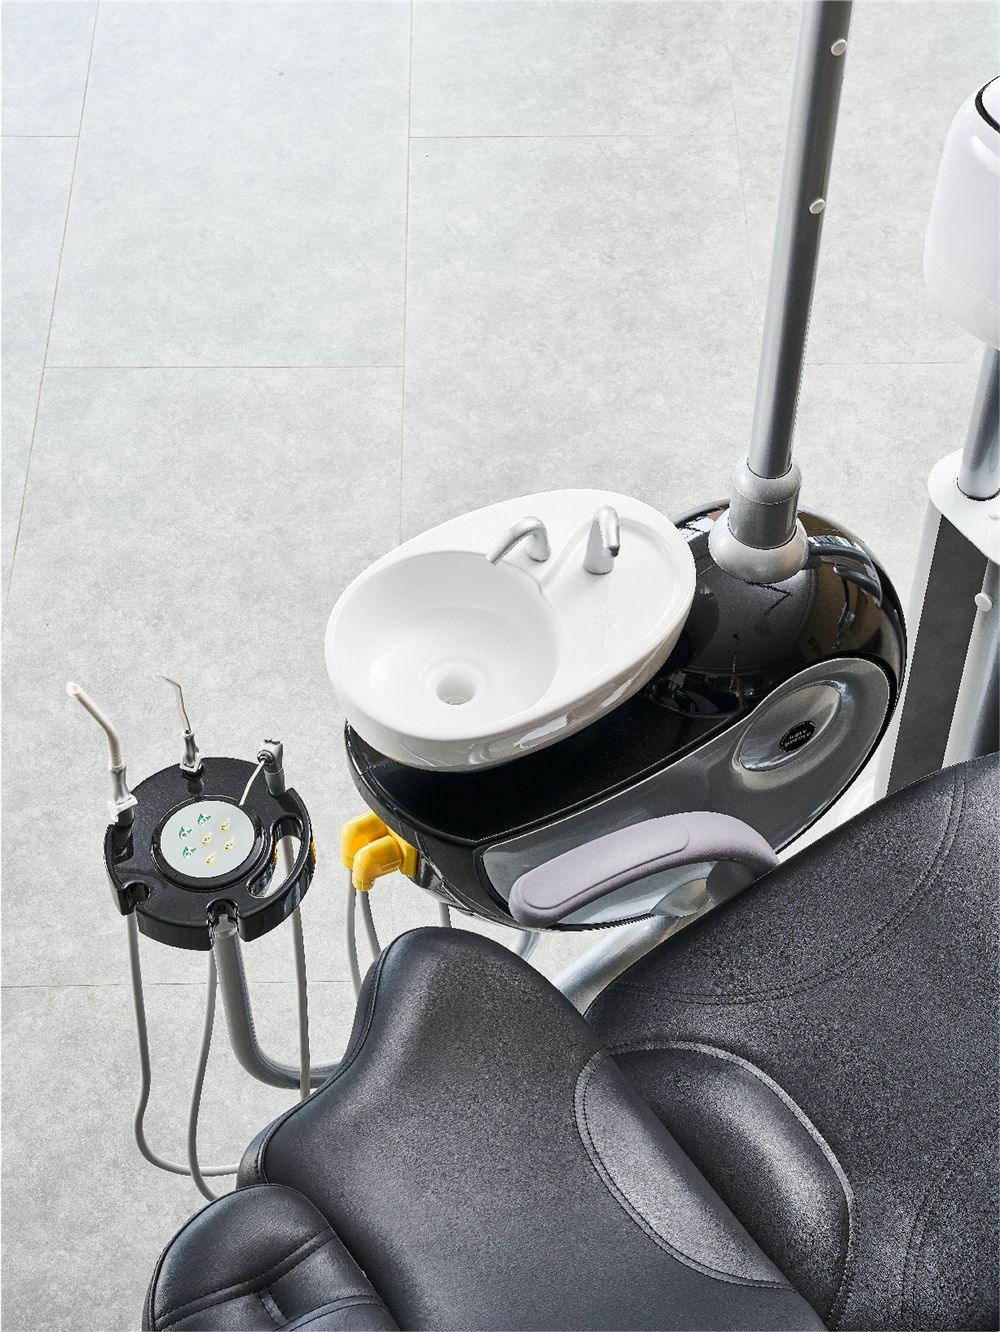 dental chair electrical connections